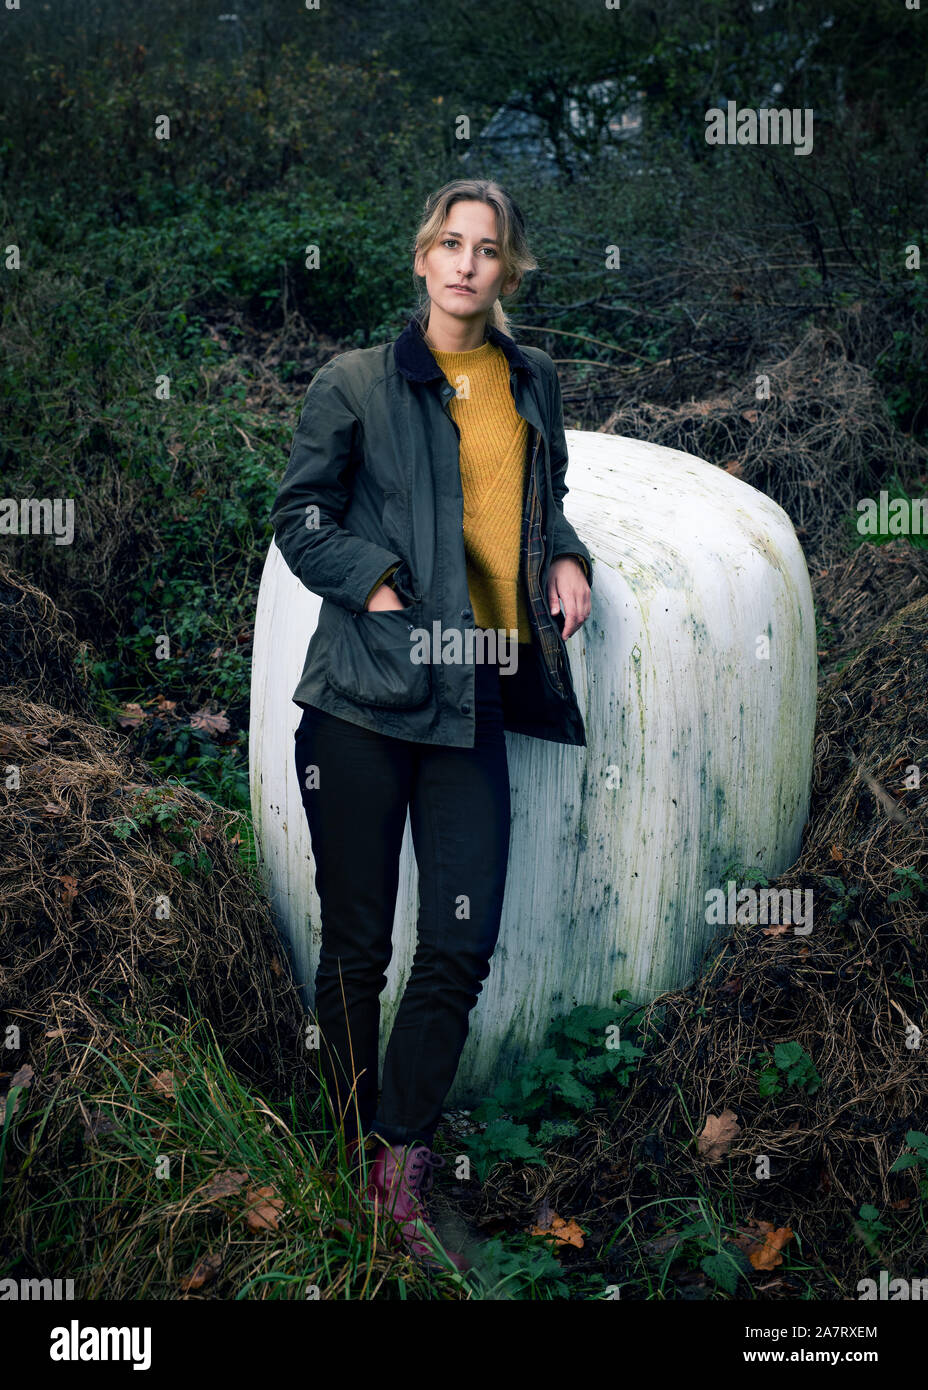 Portrait of a blonde woman in a forest with hand in her pocket Stock Photo